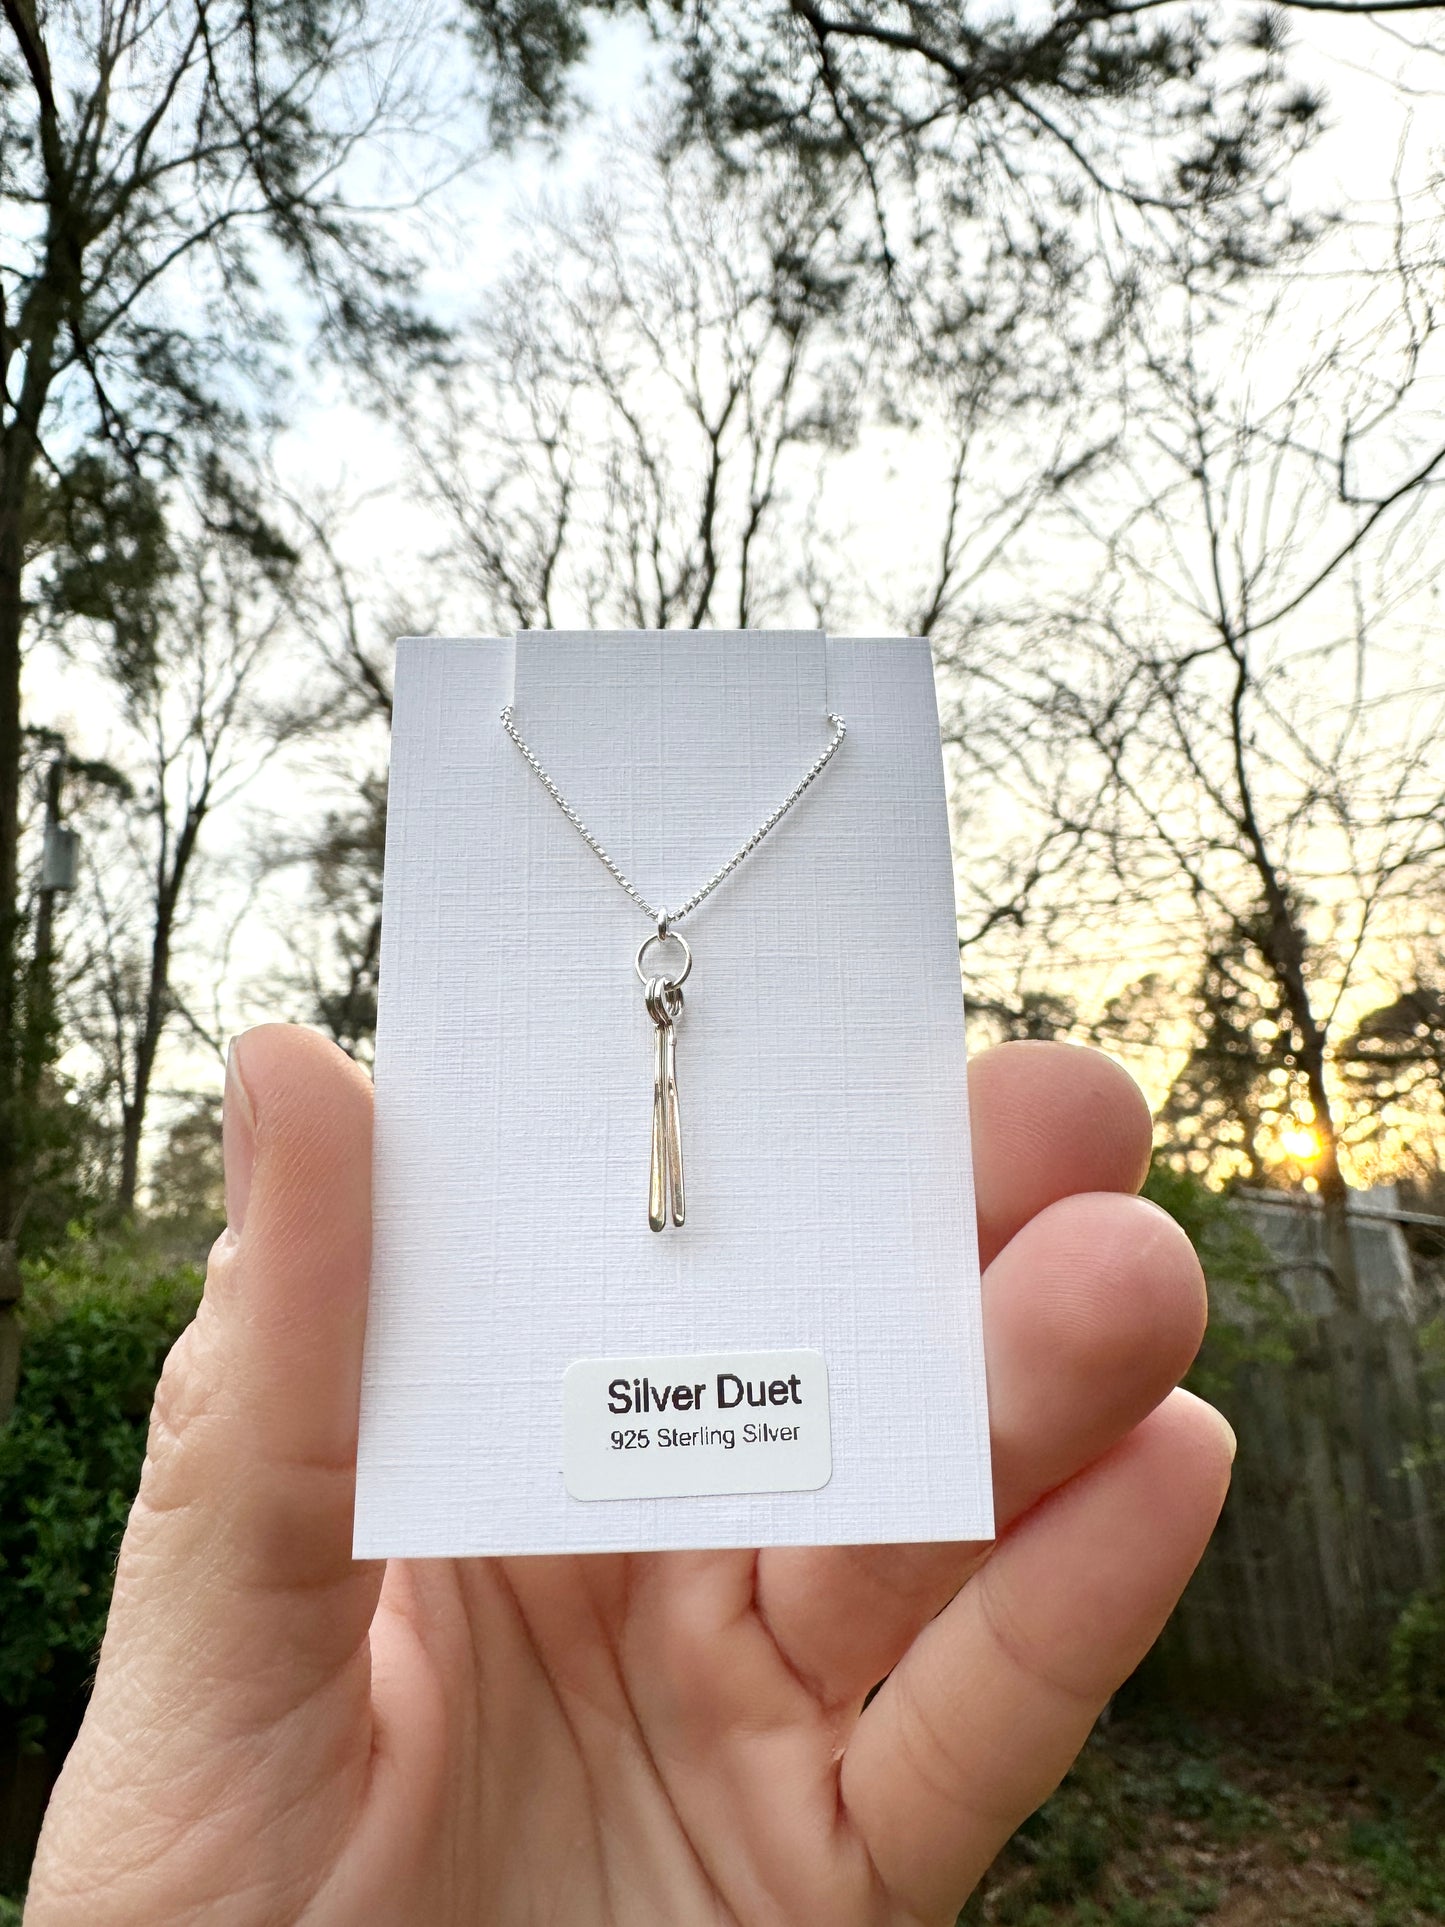 Silver Duet Charm Necklace in .925 Sterling Silver